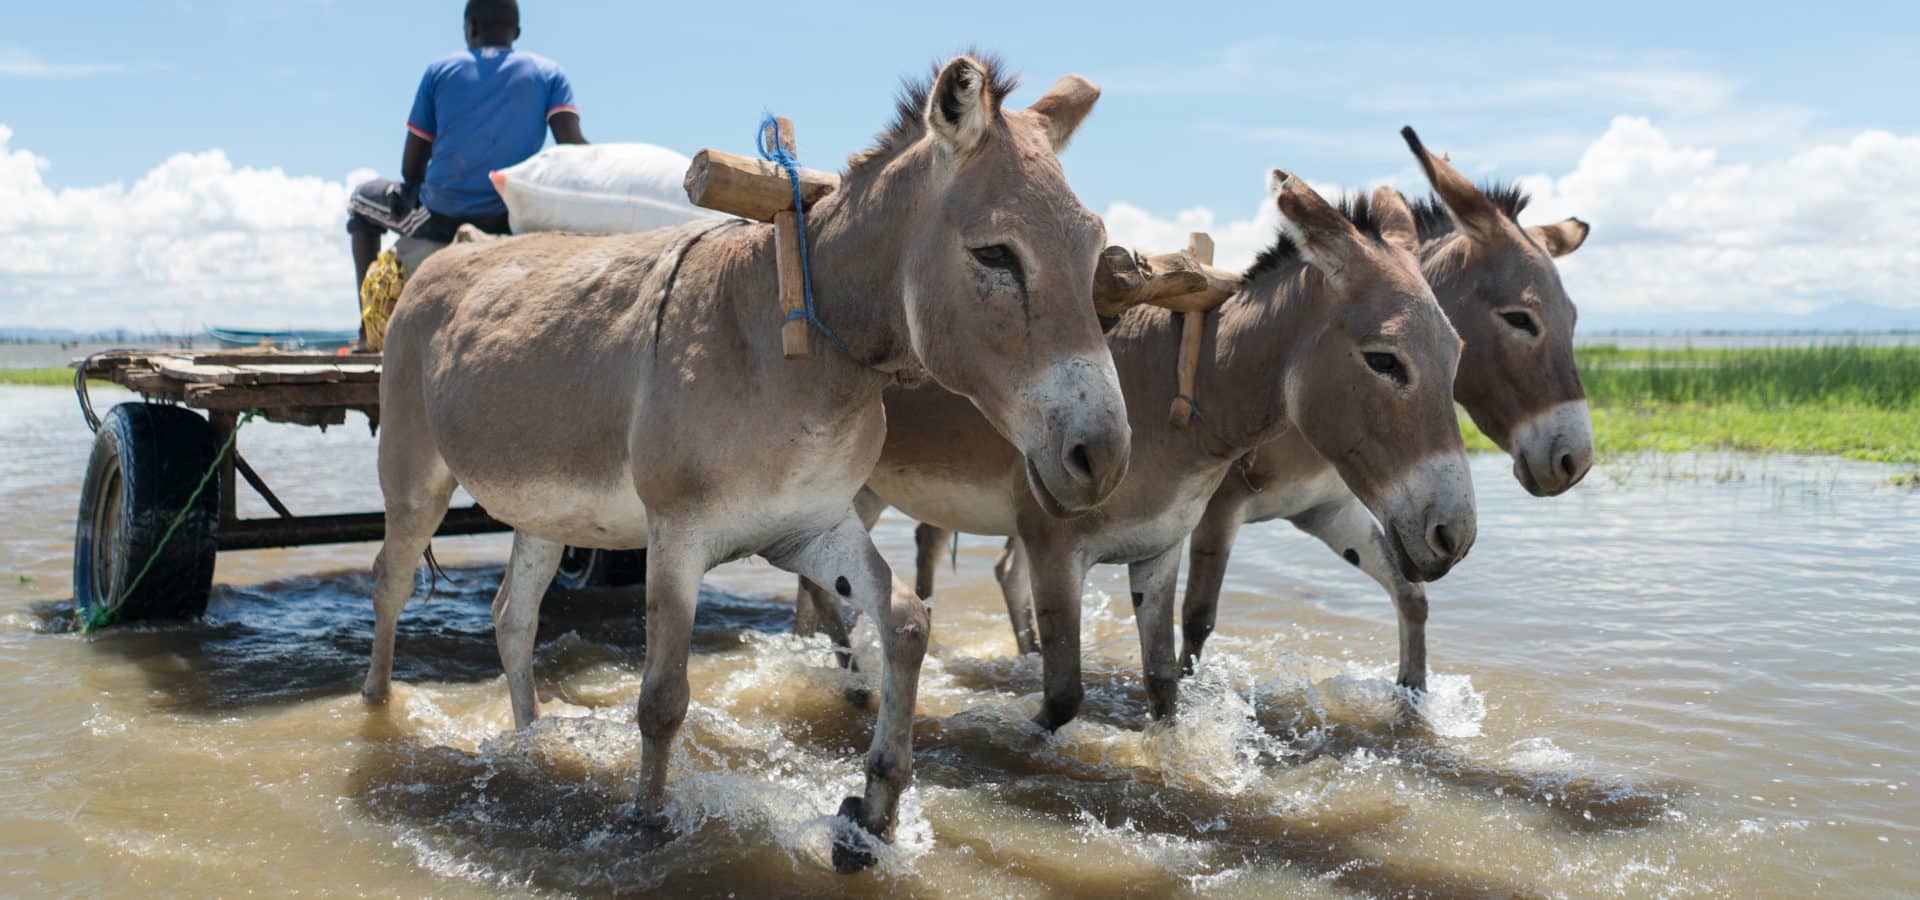 Three donkeys pulling a cart through shallow water with a man wearing a blue tshirt sitting on the cart